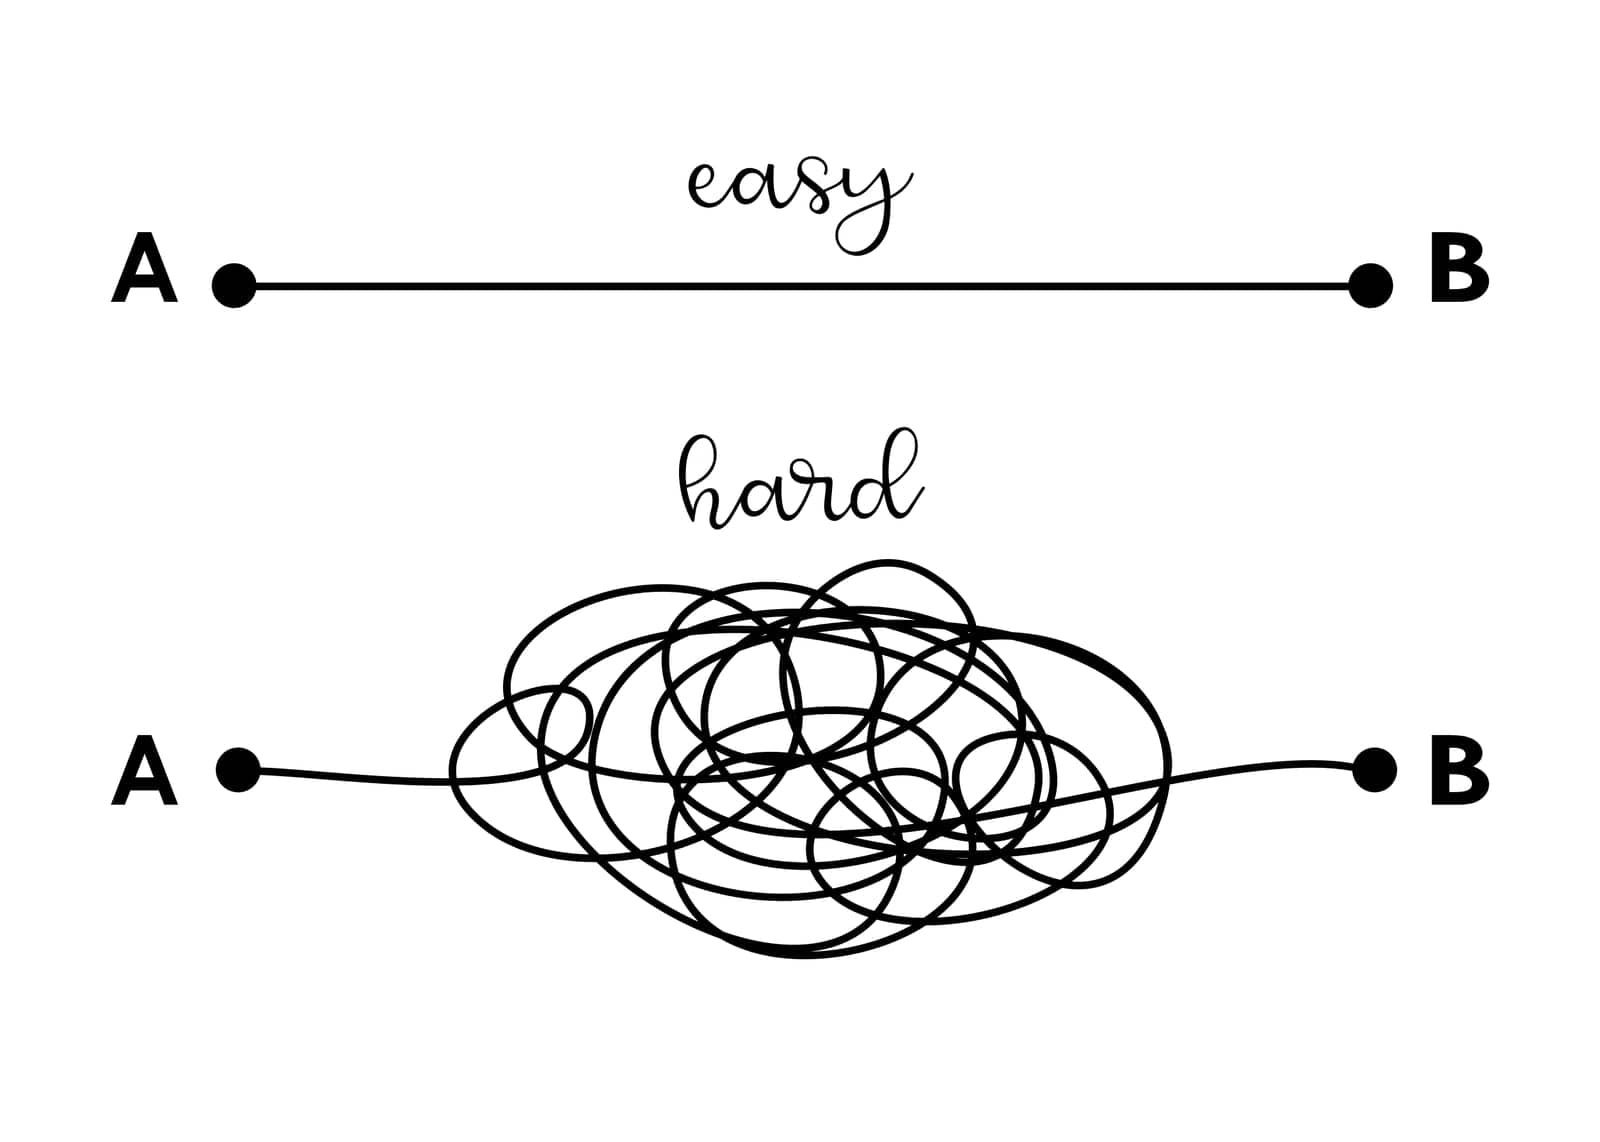 Hard and Easy way solution concept illustrated by tangled and straight lines. Complicated and simple path decision. Vector illustration design.